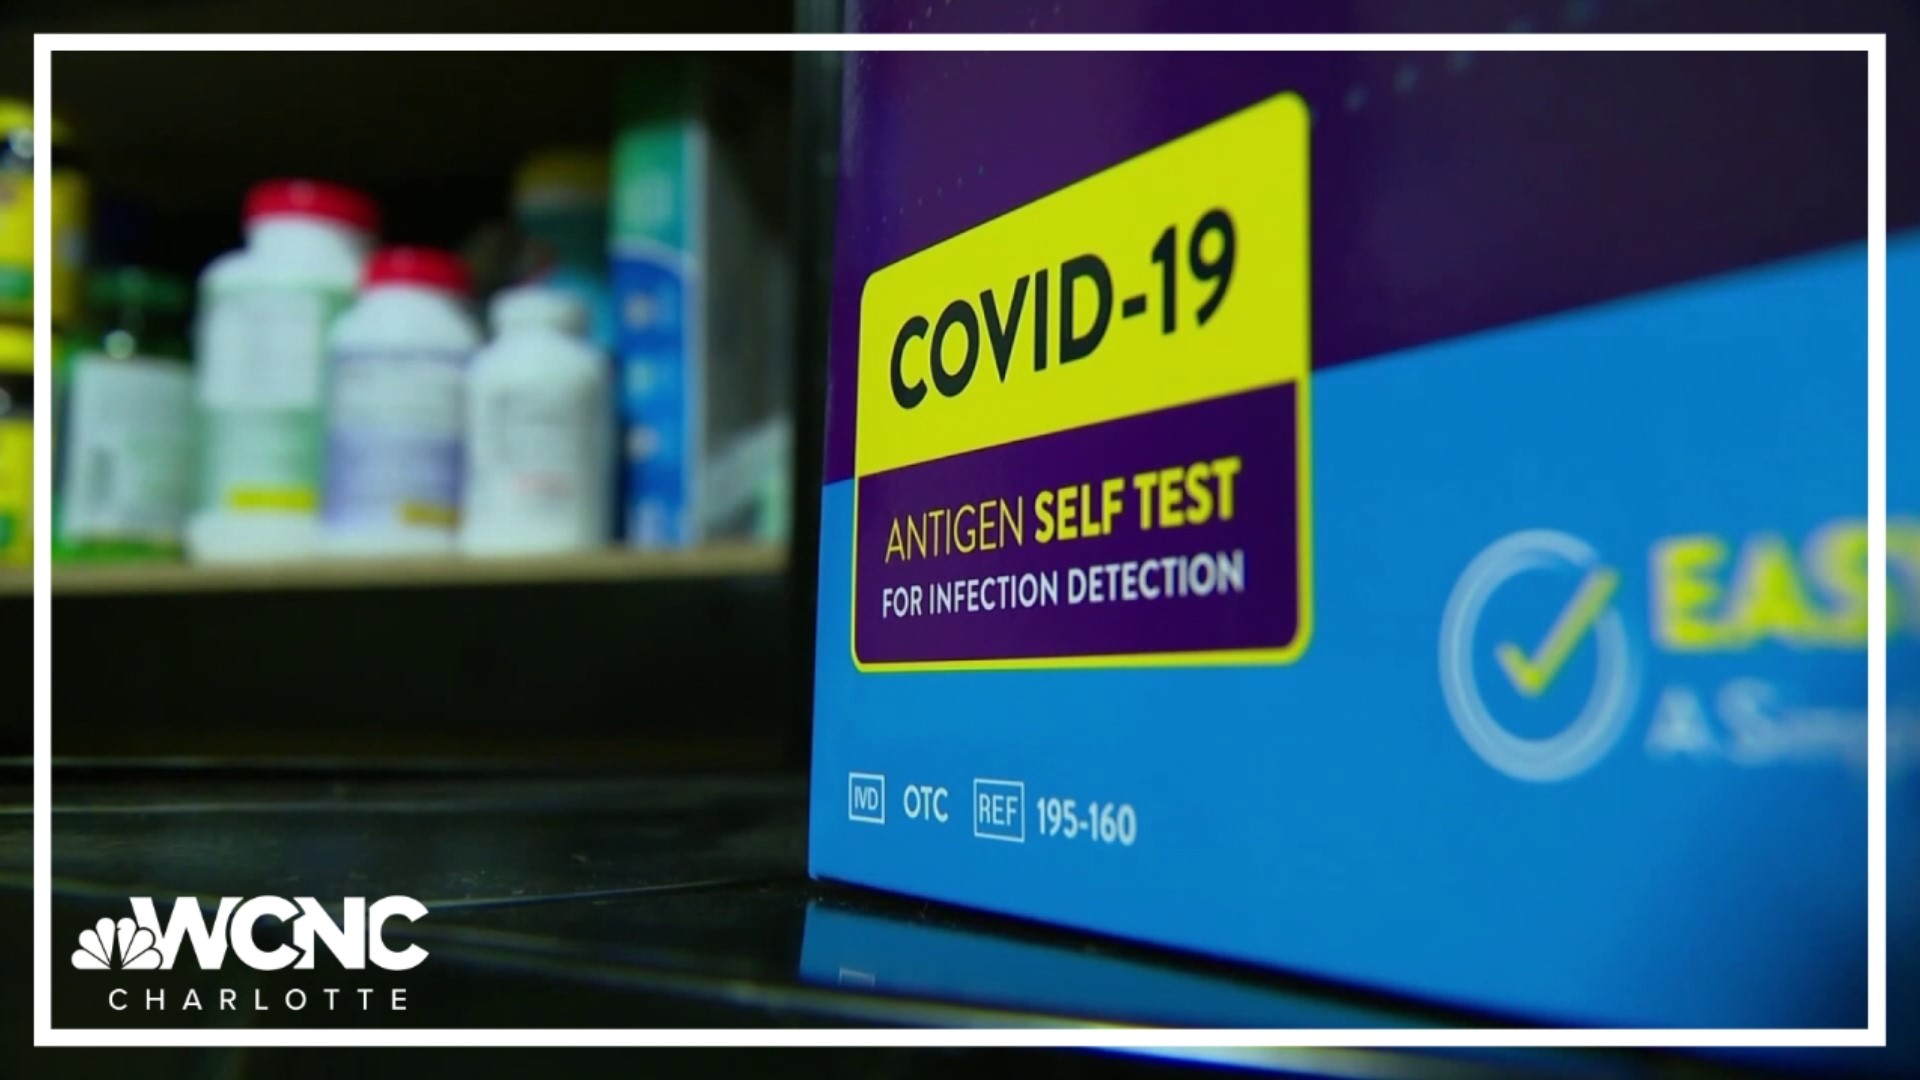 The Department of Health and Human Services says orders can be placed at COVIDTests.gov starting Sept. 25, and that no-cost tests will be delivered for free.